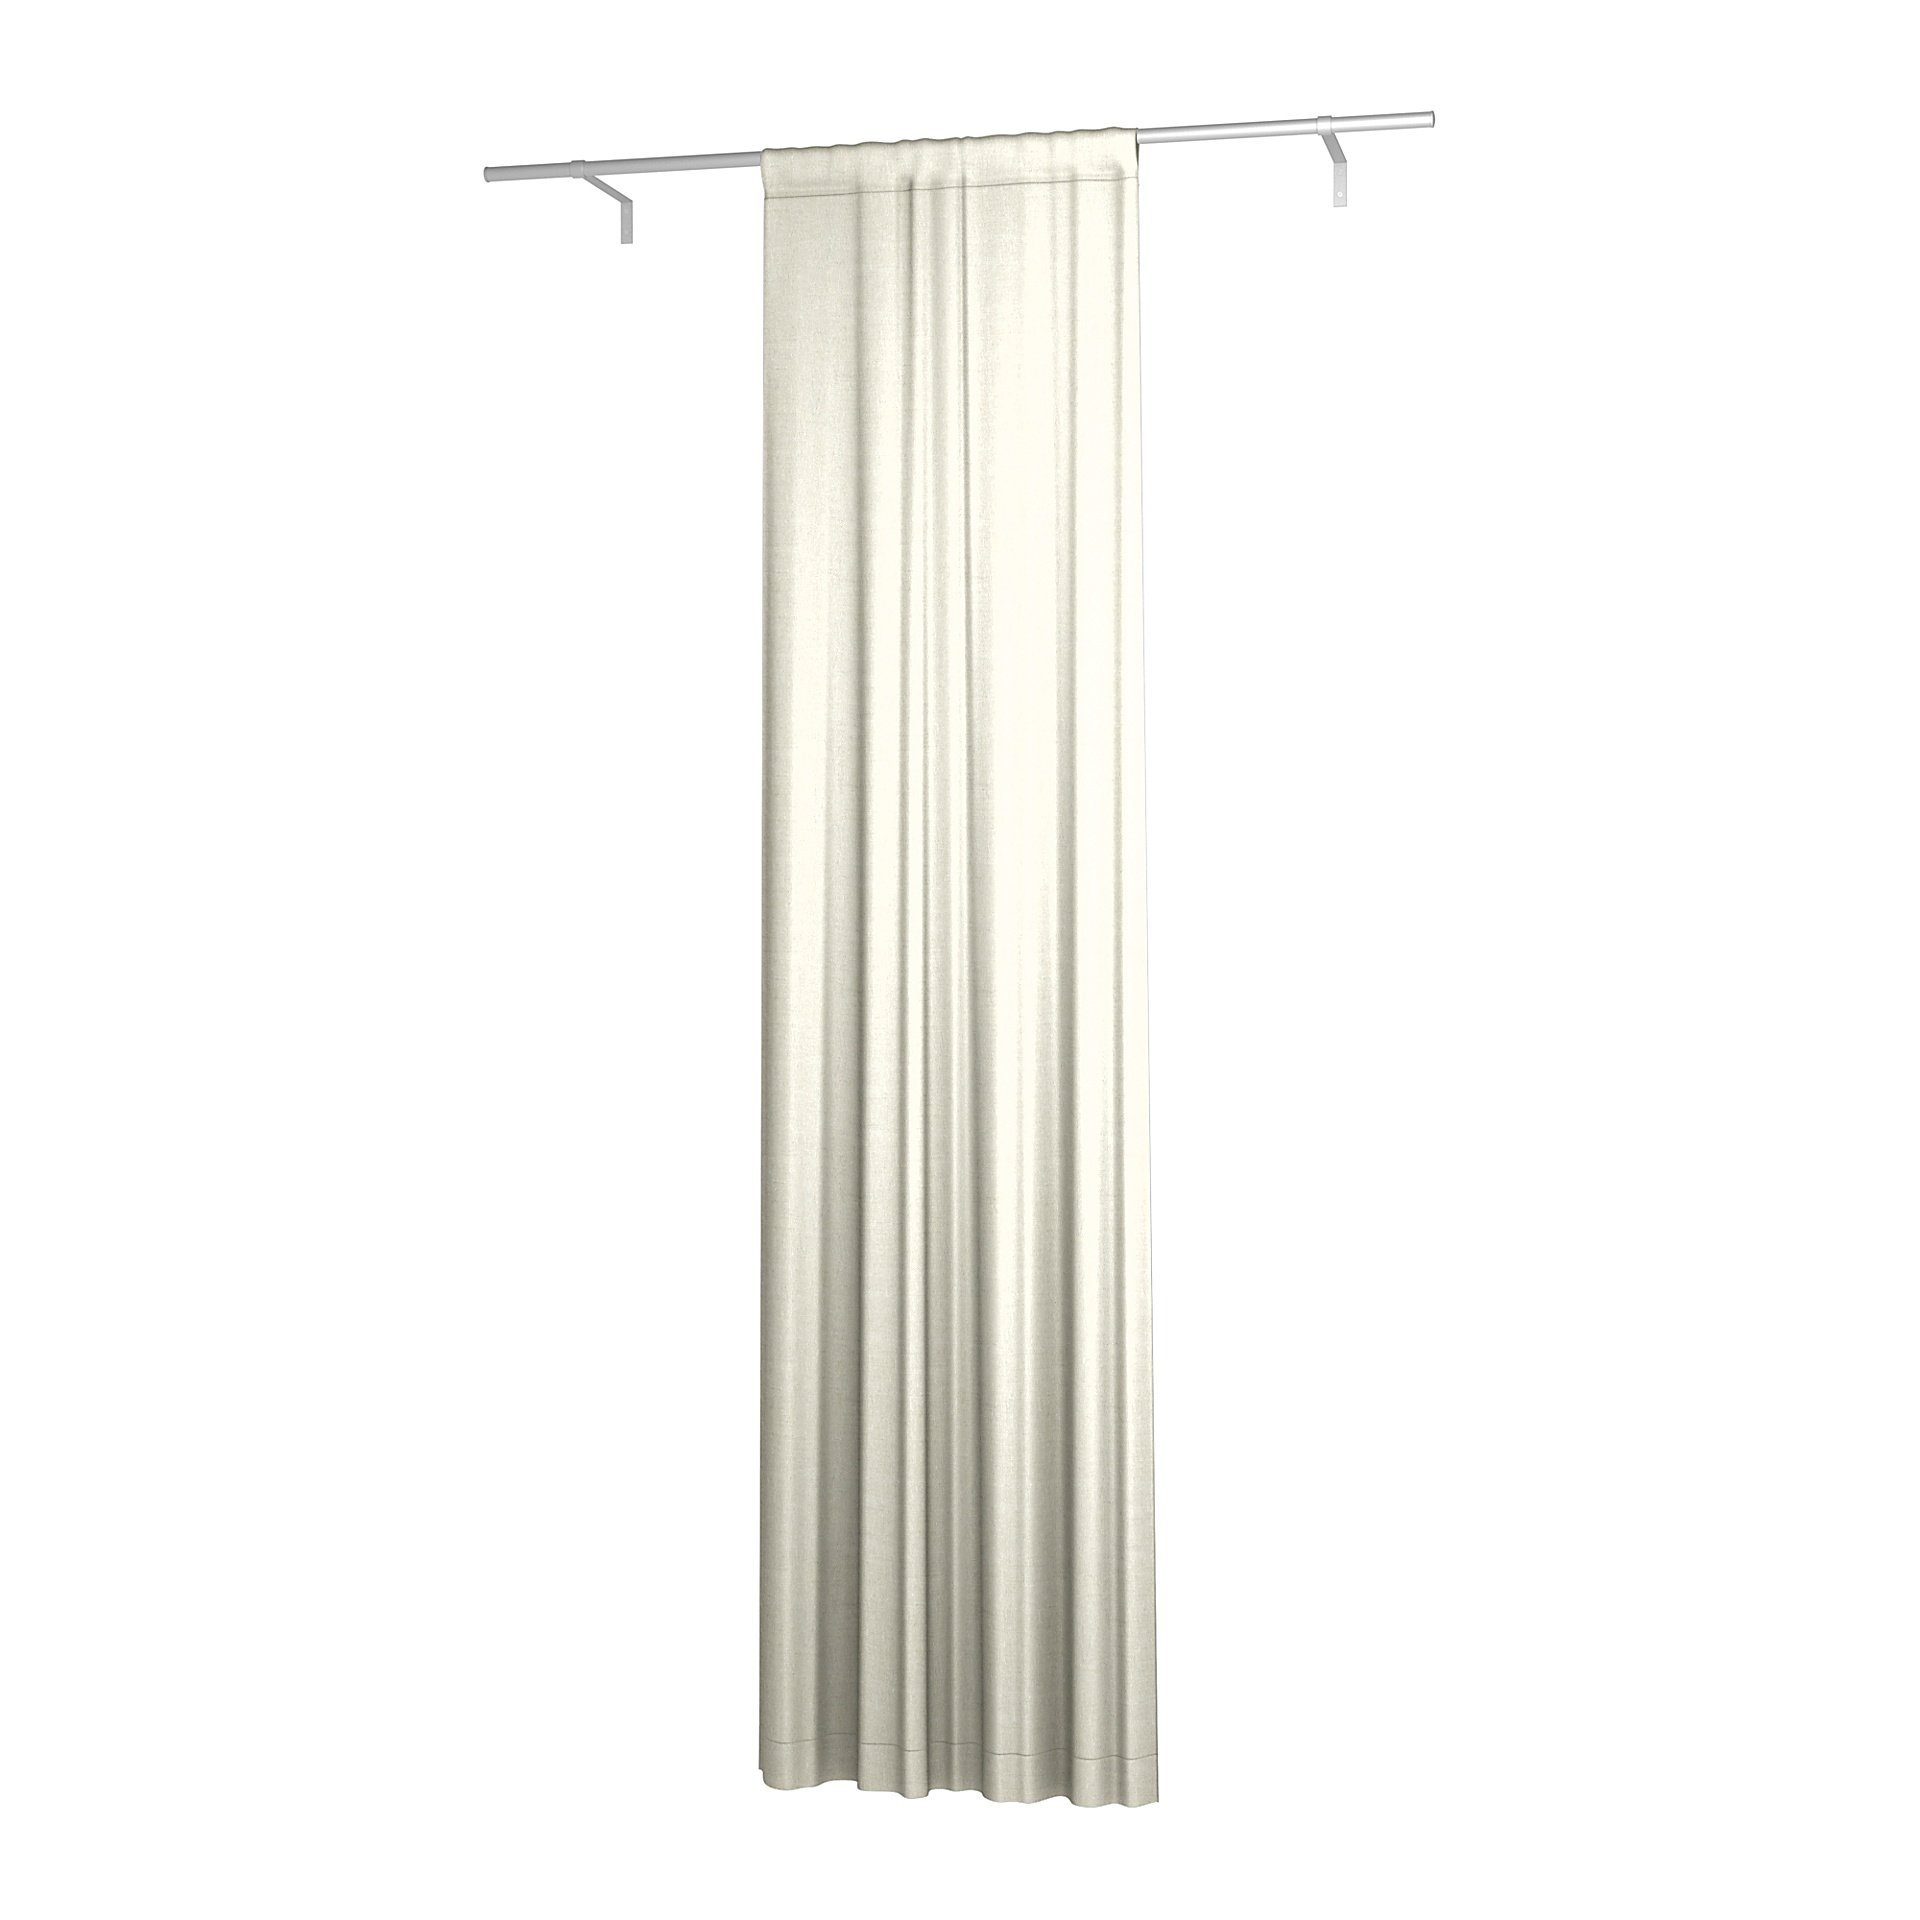 Single Width Curtain Panel with Tunnel/Creaseband, 300 cm, Natural, Linen - Bemz